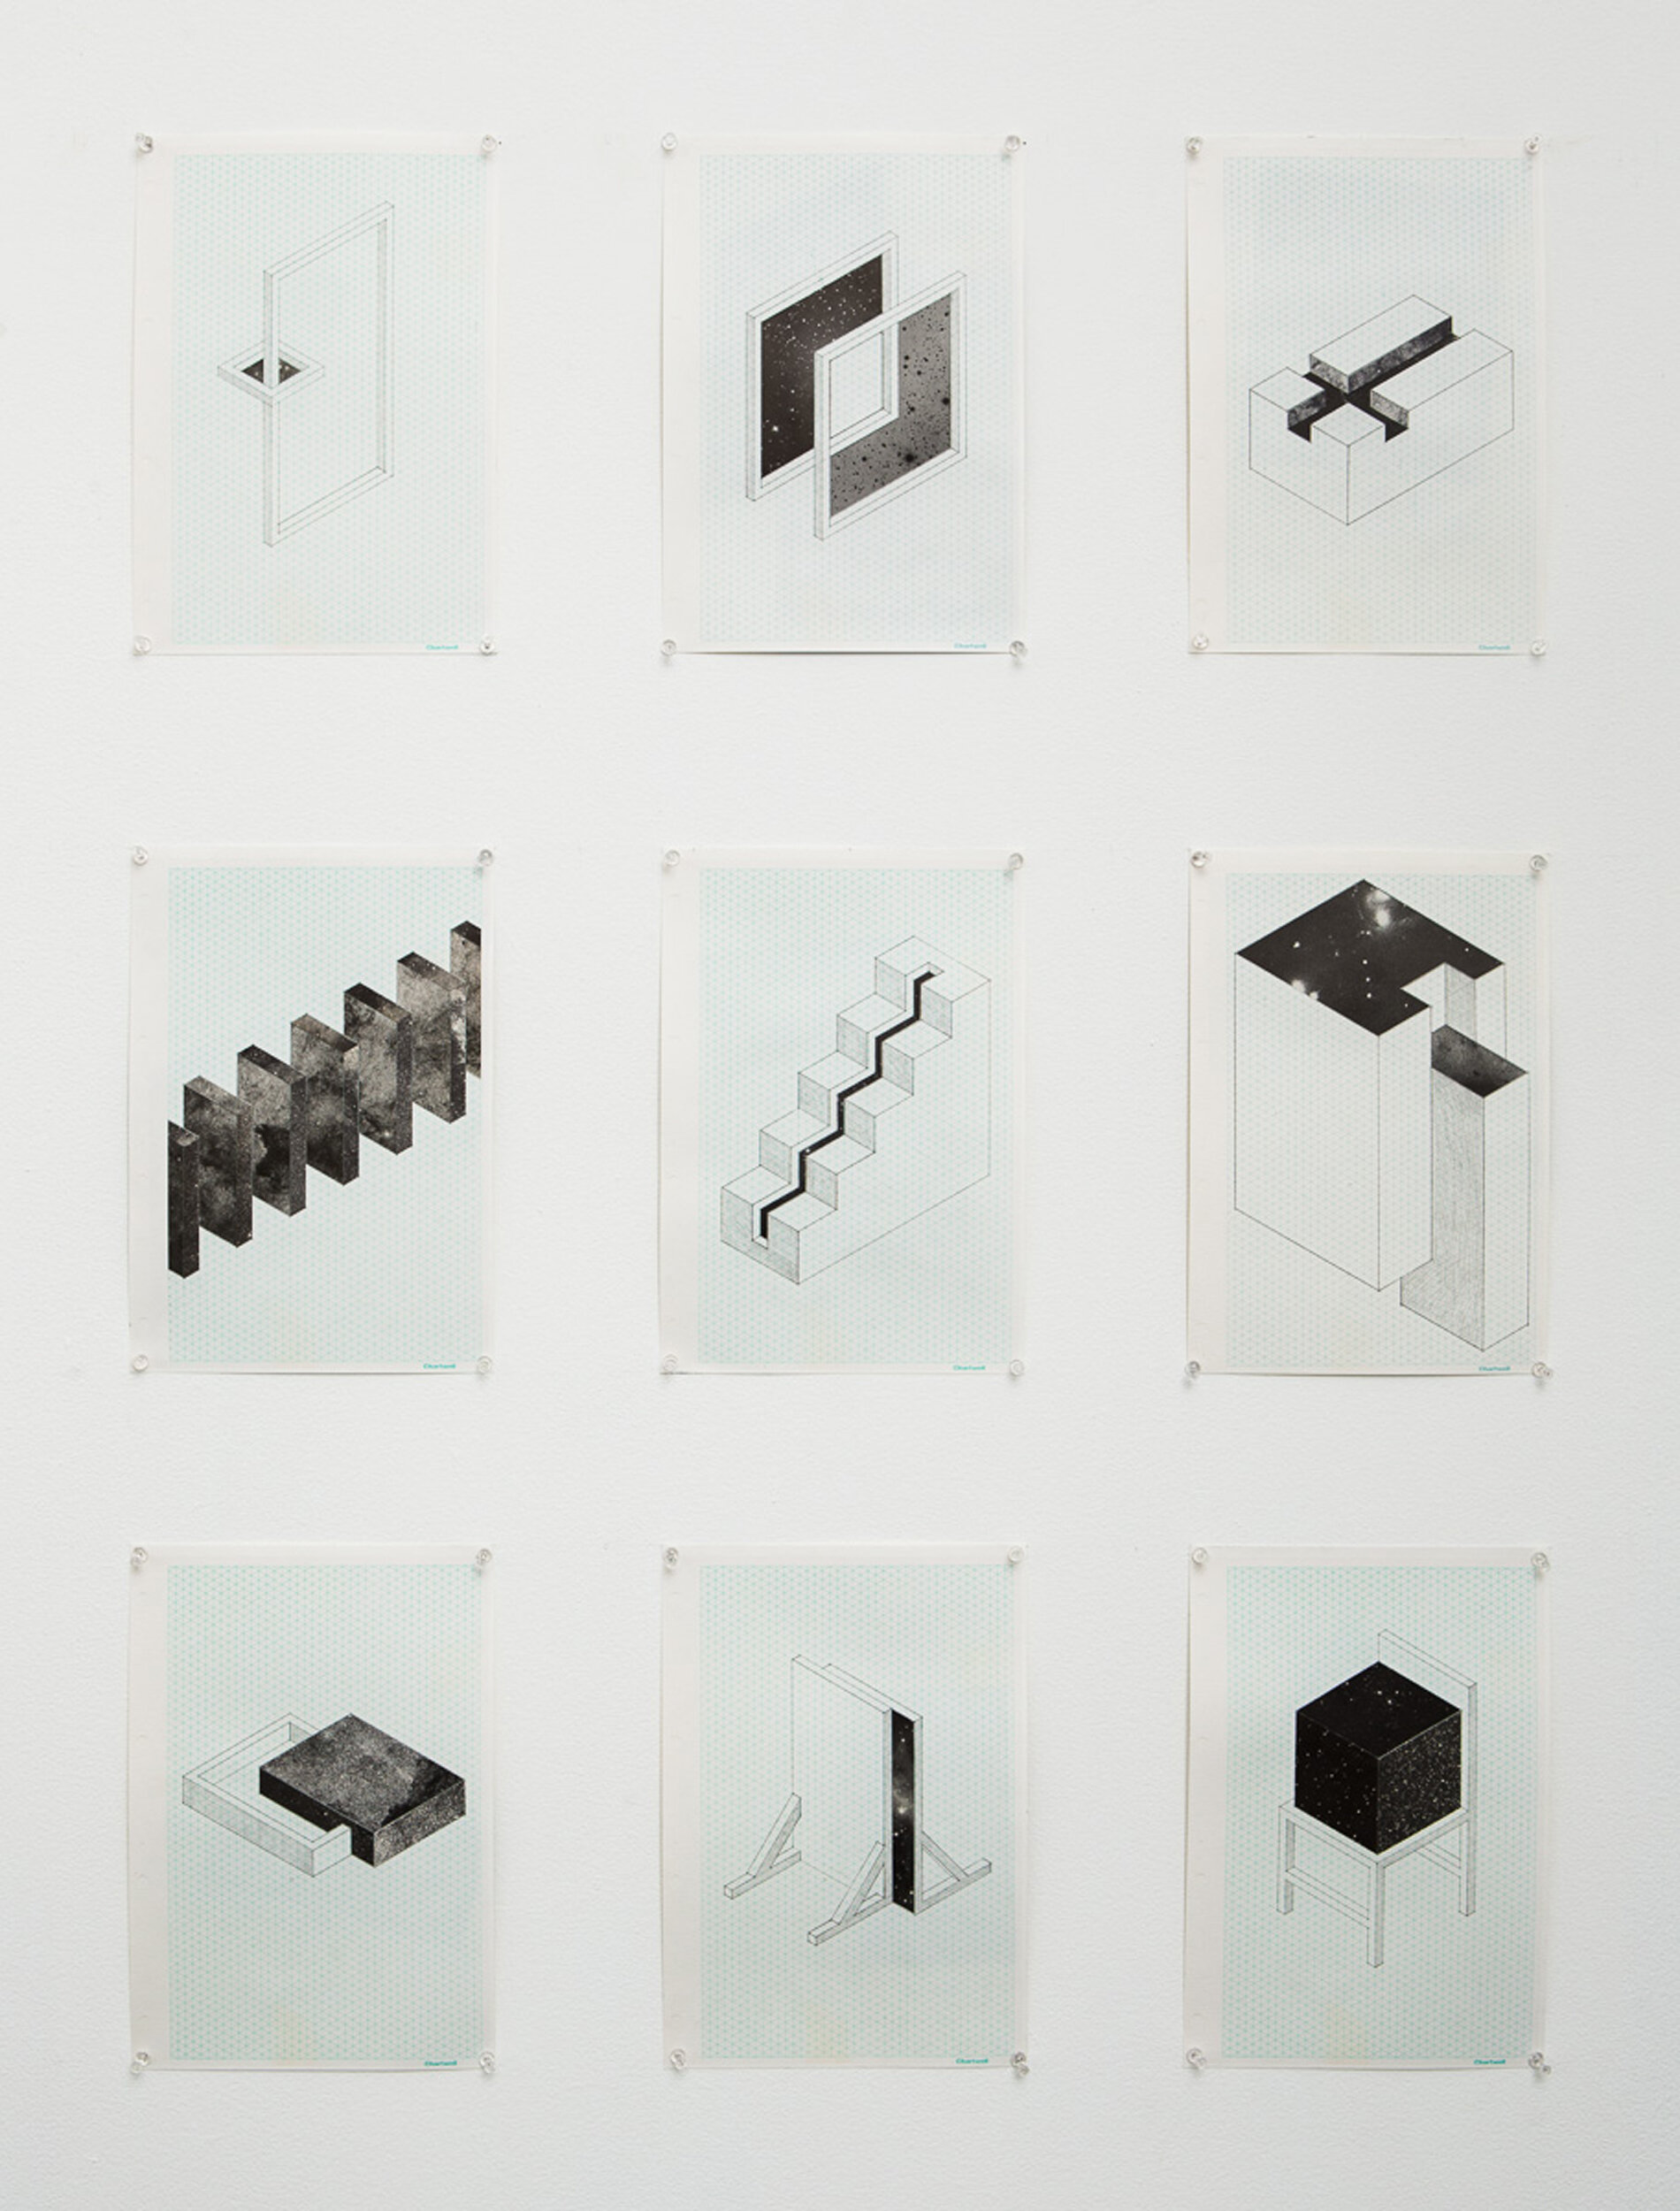  2012-2013 Collage, digital print, and graphite on paper 55 components, each 30x21cm Installation view, Contemporary Art Centre of South Australia Photograph by James Field    Isometric drawings of various structures and apertures are interspersed wi